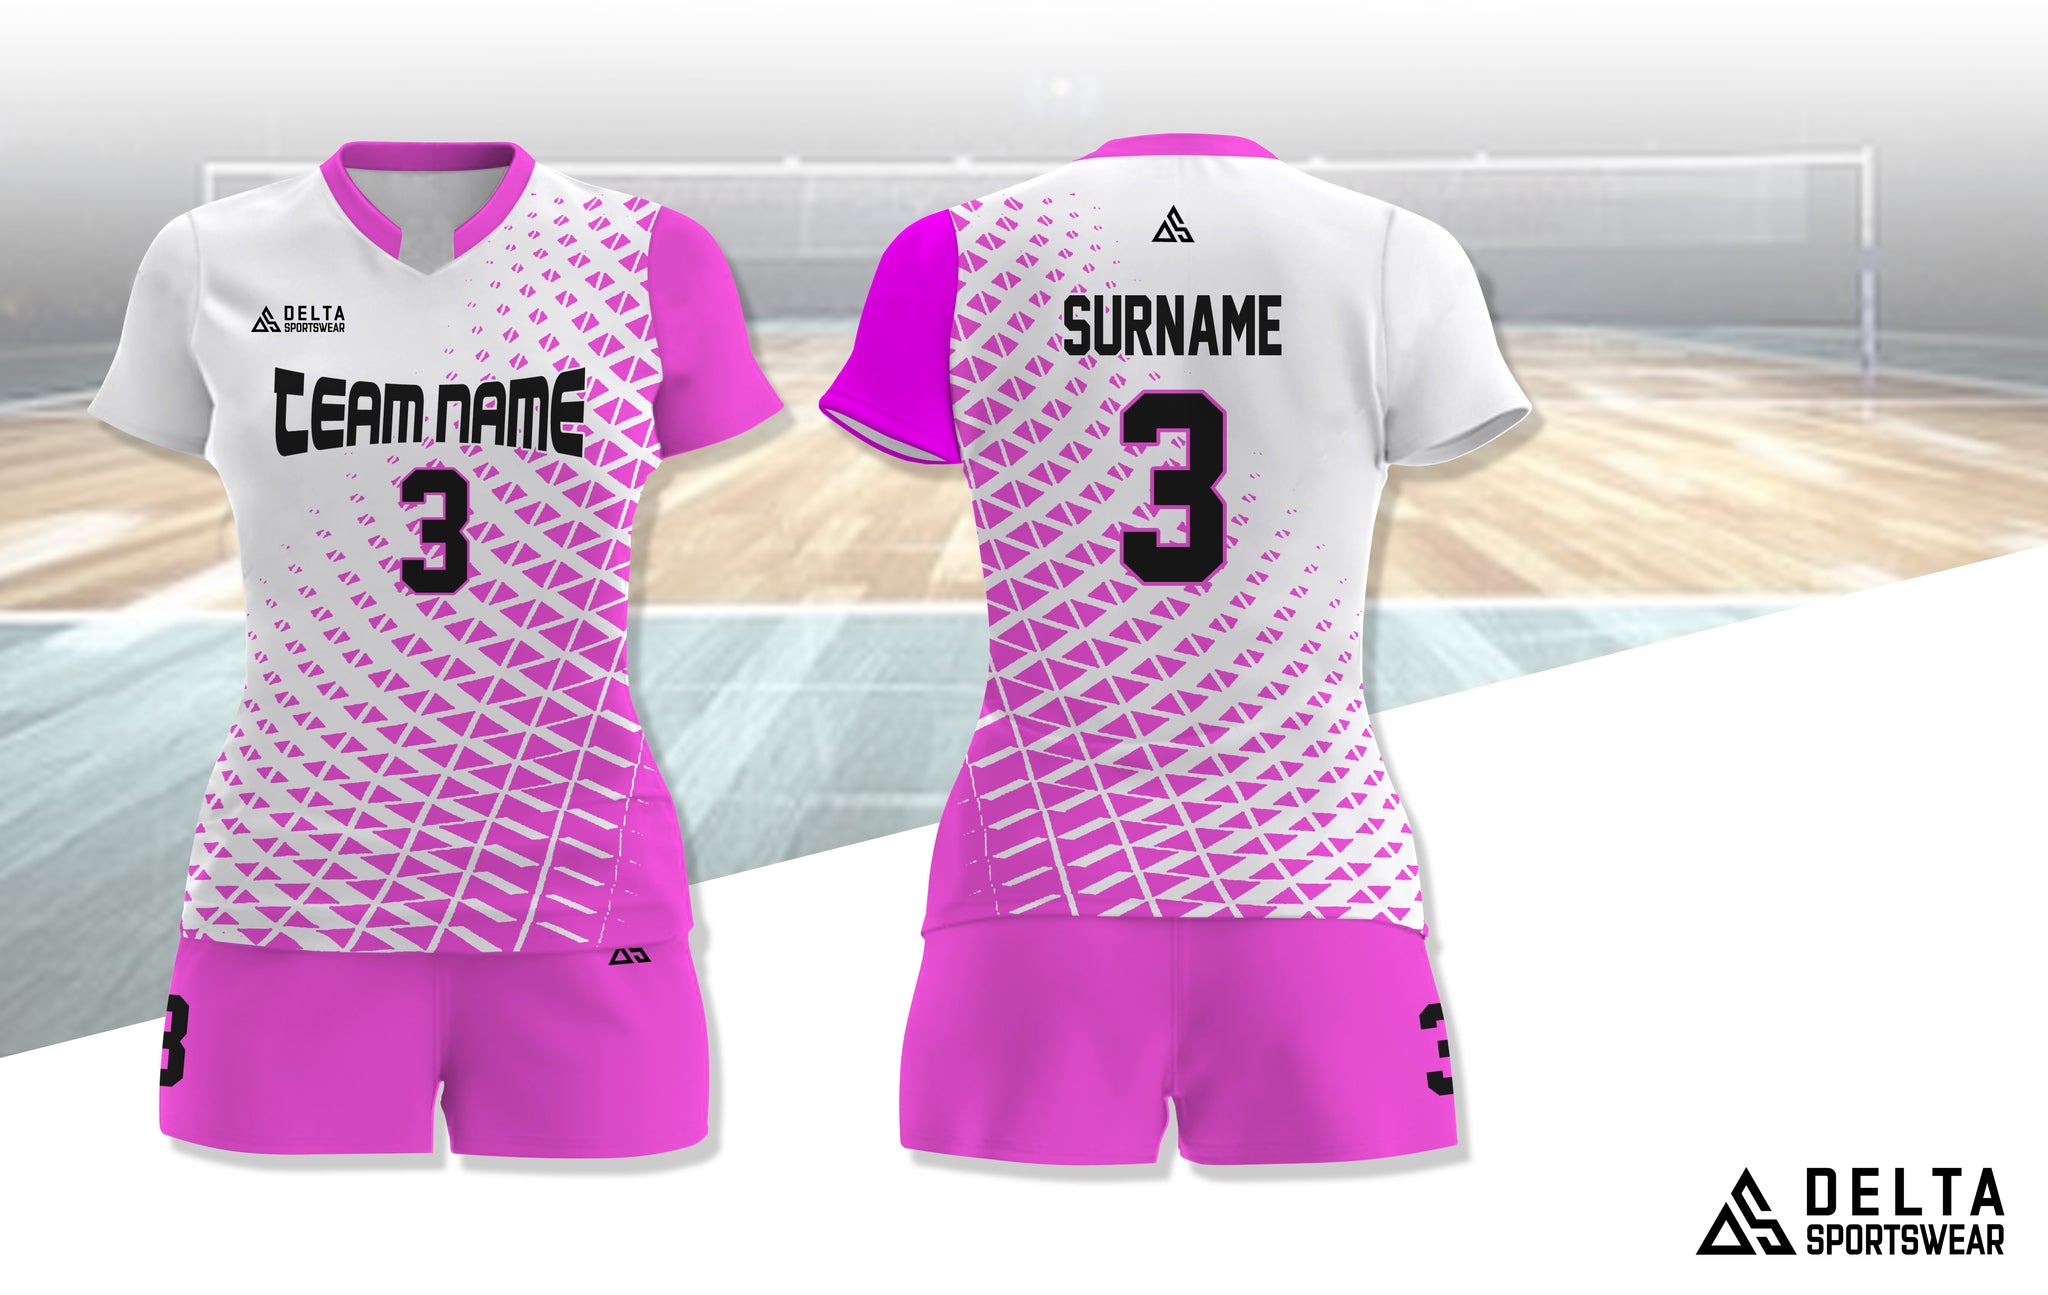 volleyball jersey philippines